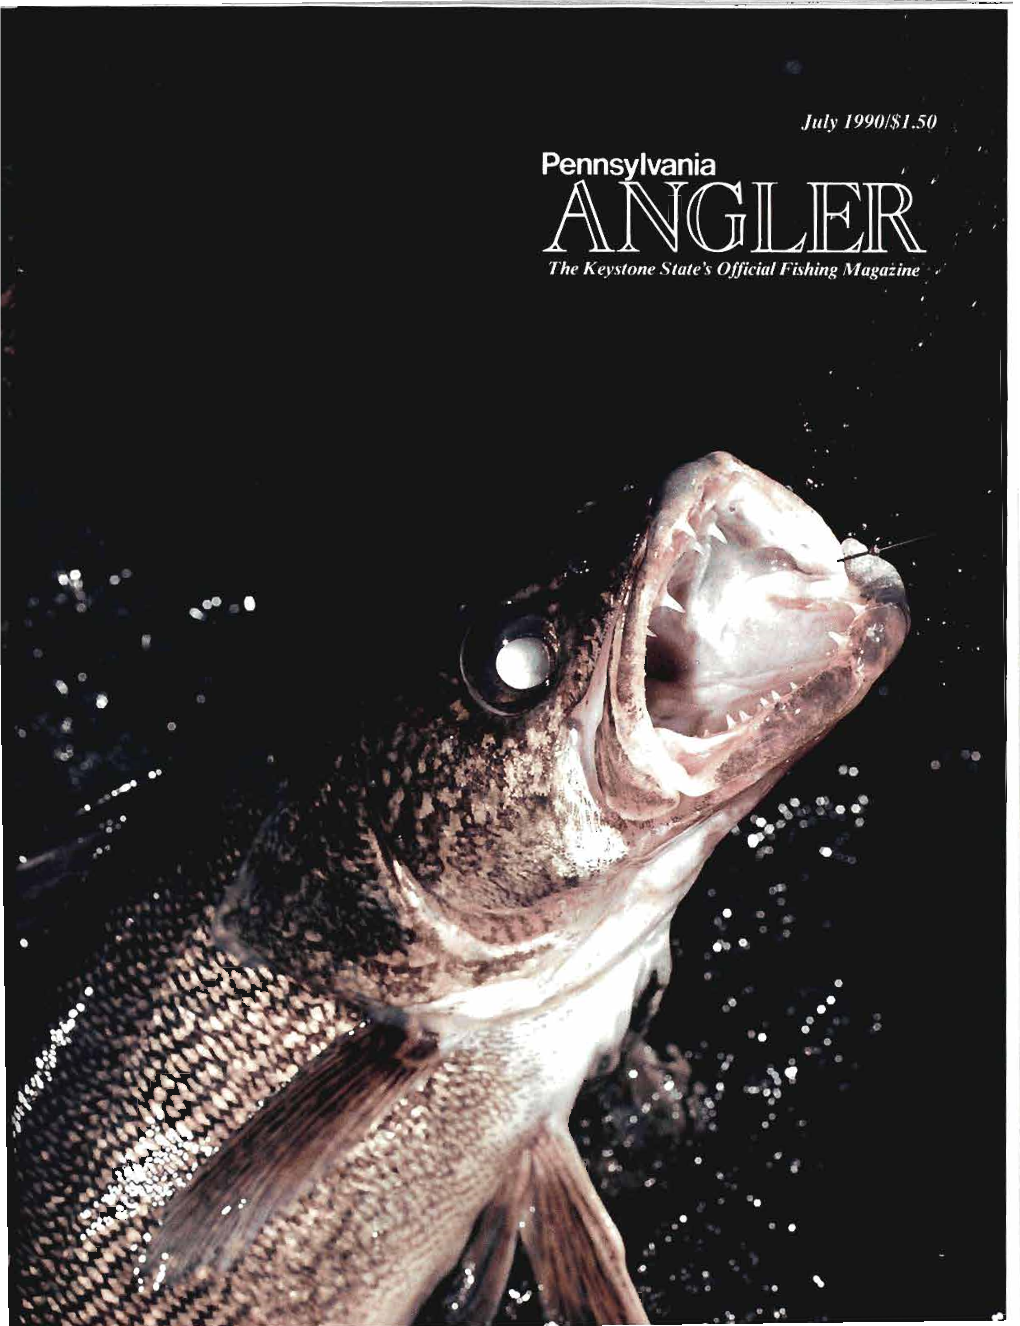 Pennsylvania Angler (ISSN0031-434X) Is Published Monthly by the Pennsylvania Fish Commission, 3532 Walnut Street